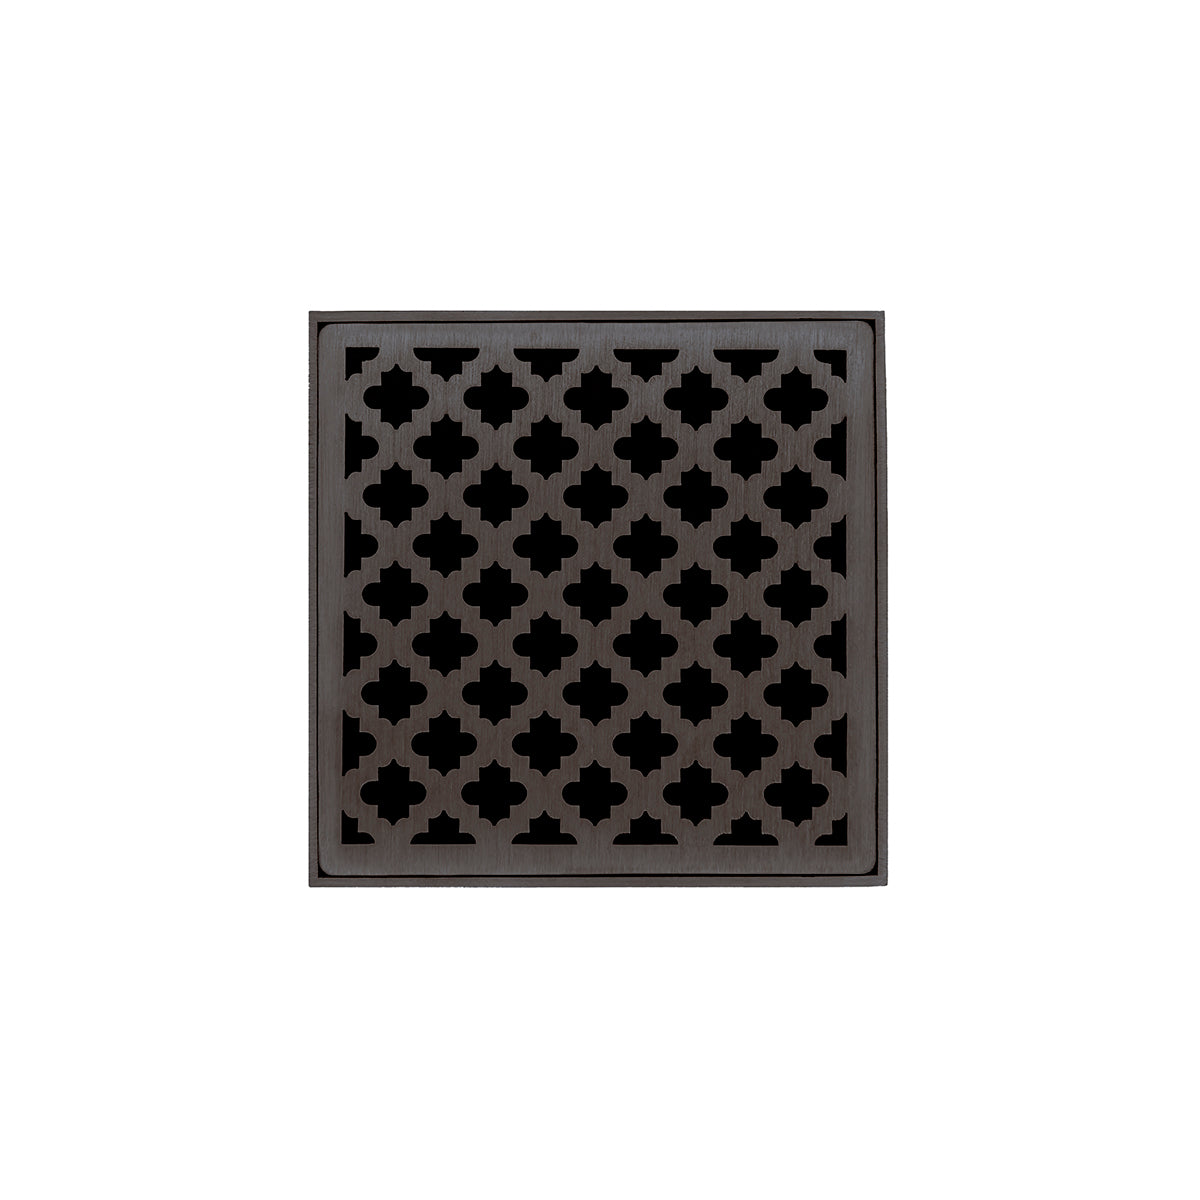 Infinity Drain 4" x 4" MDB 4 Premium Center Drain Kit with Moor Pattern Decorative Plate with ABS Bonded Flange Drain Body, 2", 3" and 4" Outlet